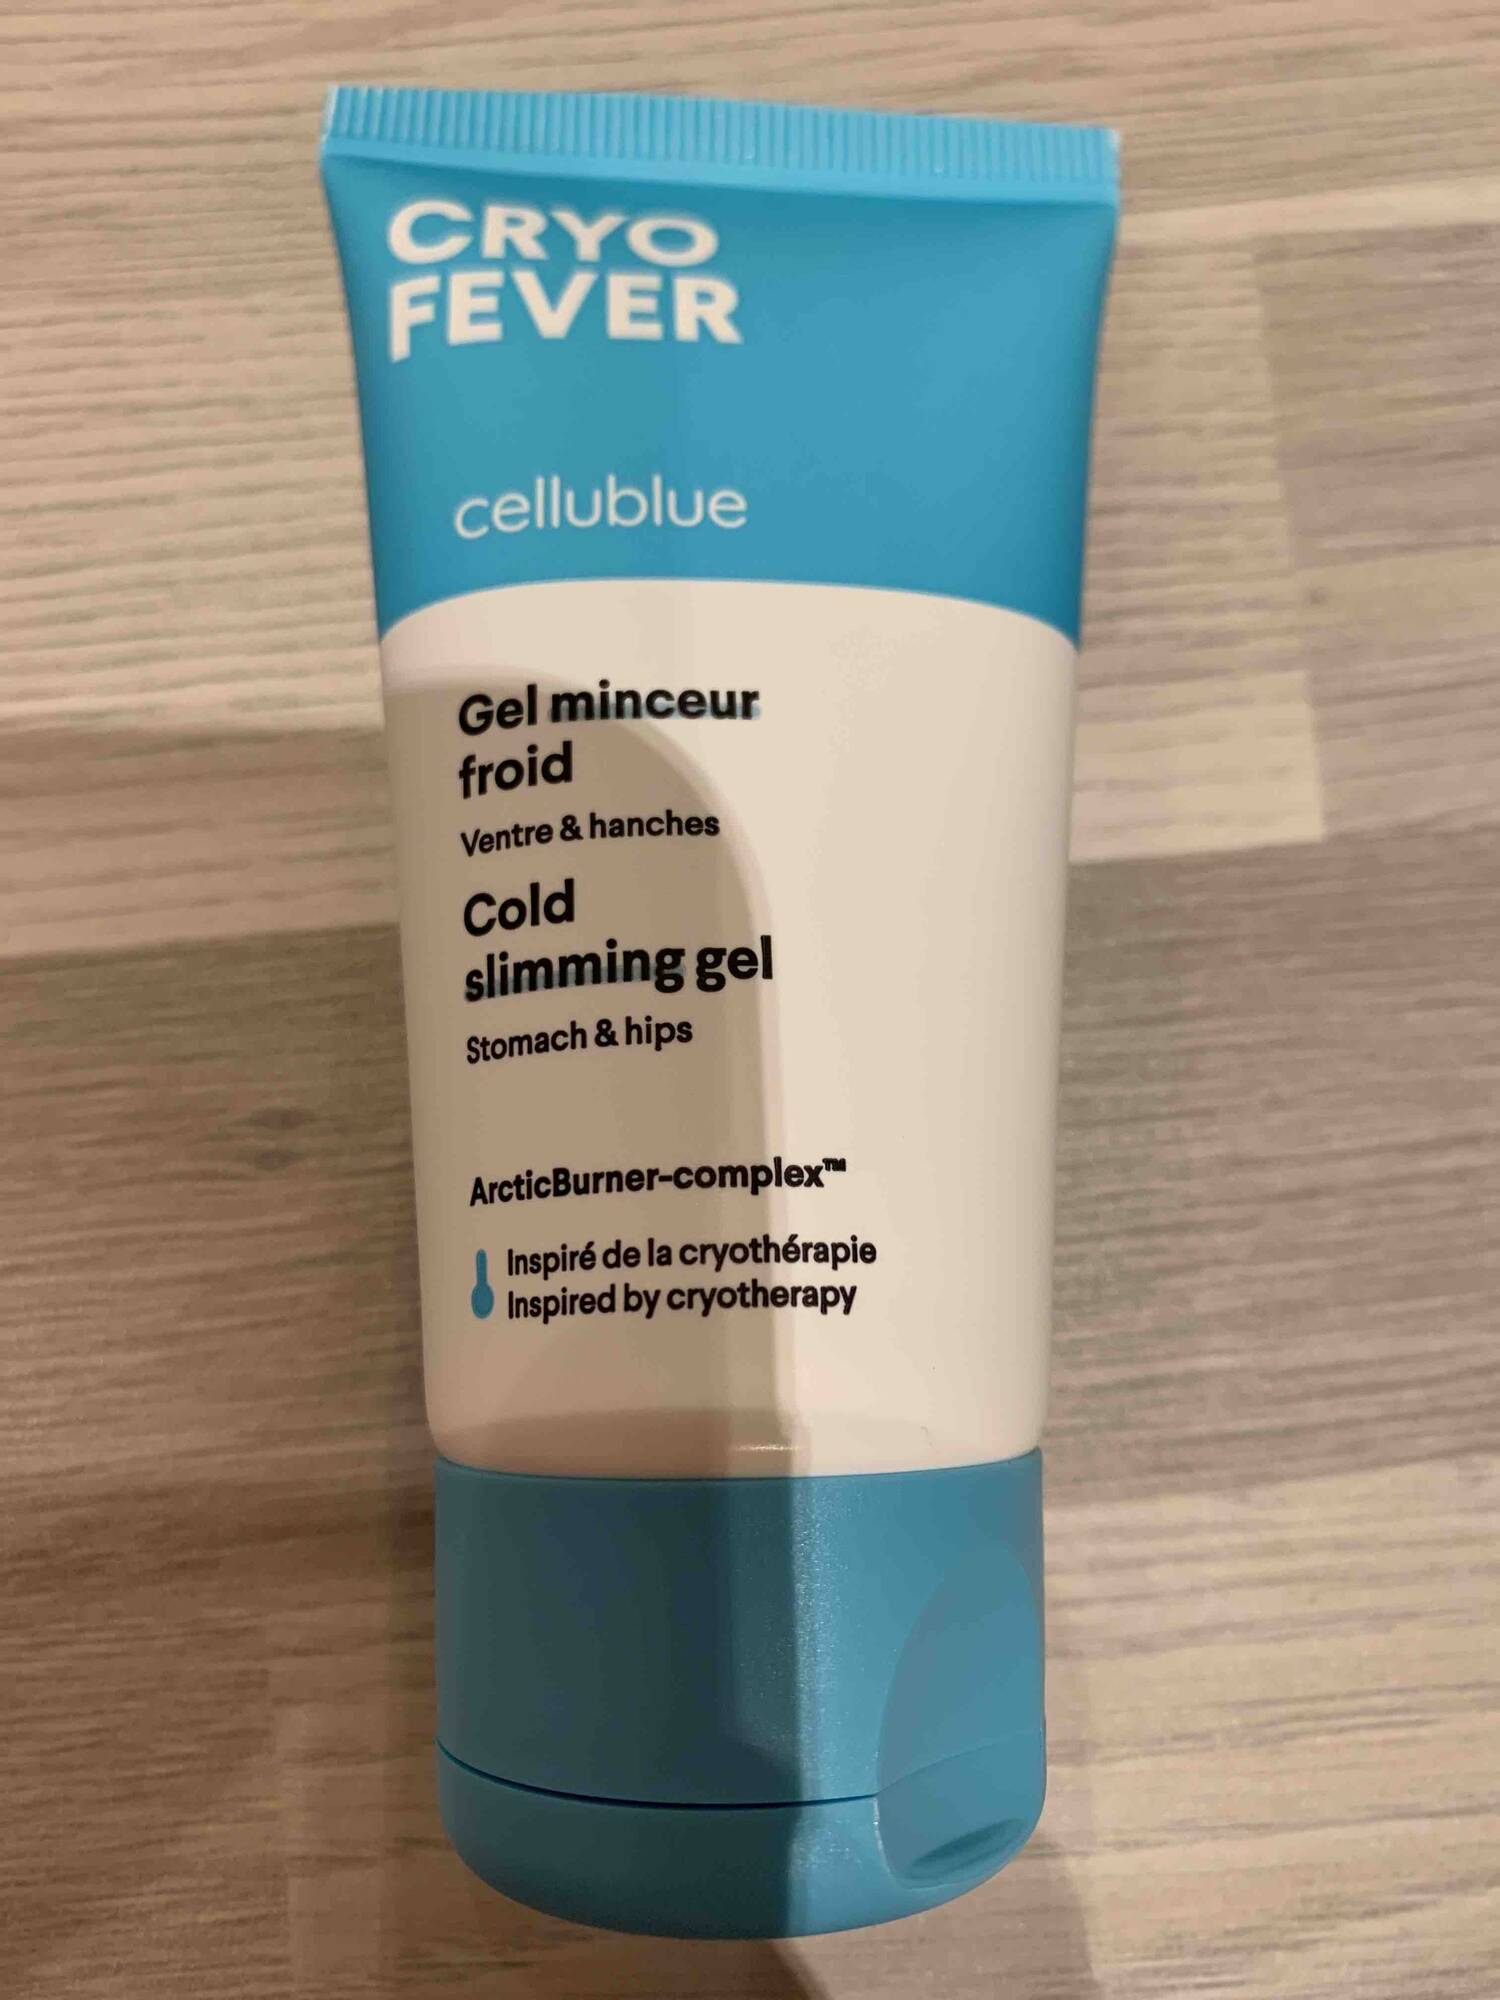 CELLUBLUE - Cryo fever - Gel minceur froid